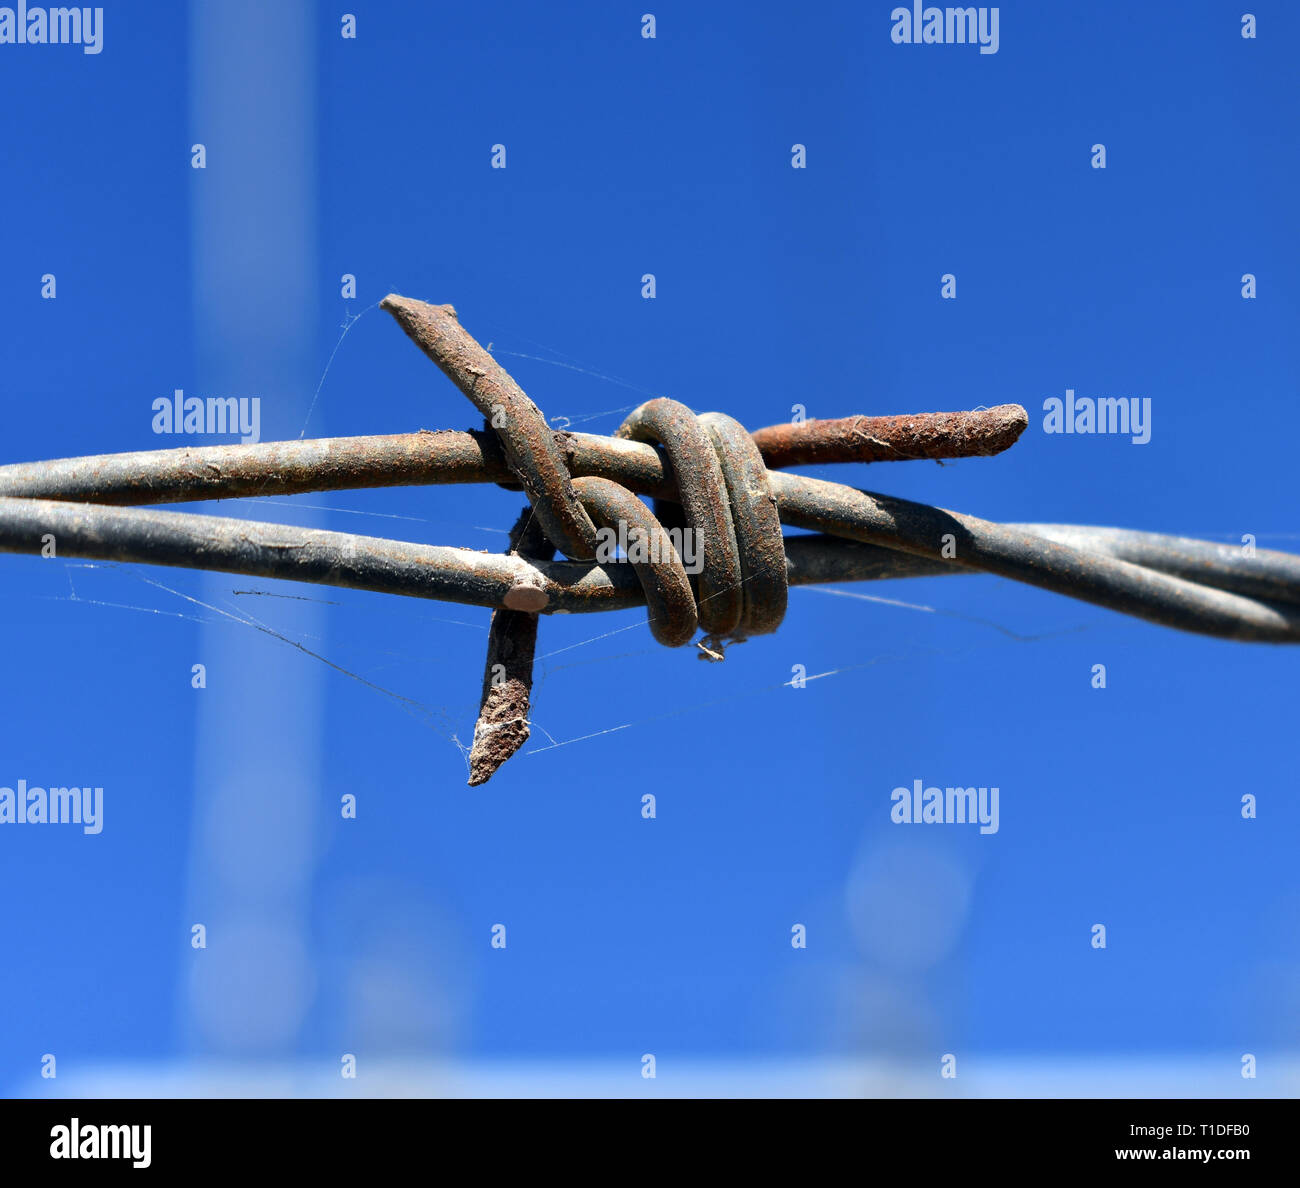 Old rusty barbed wire, close up. Electrified fence with barbed wire Stock Photo